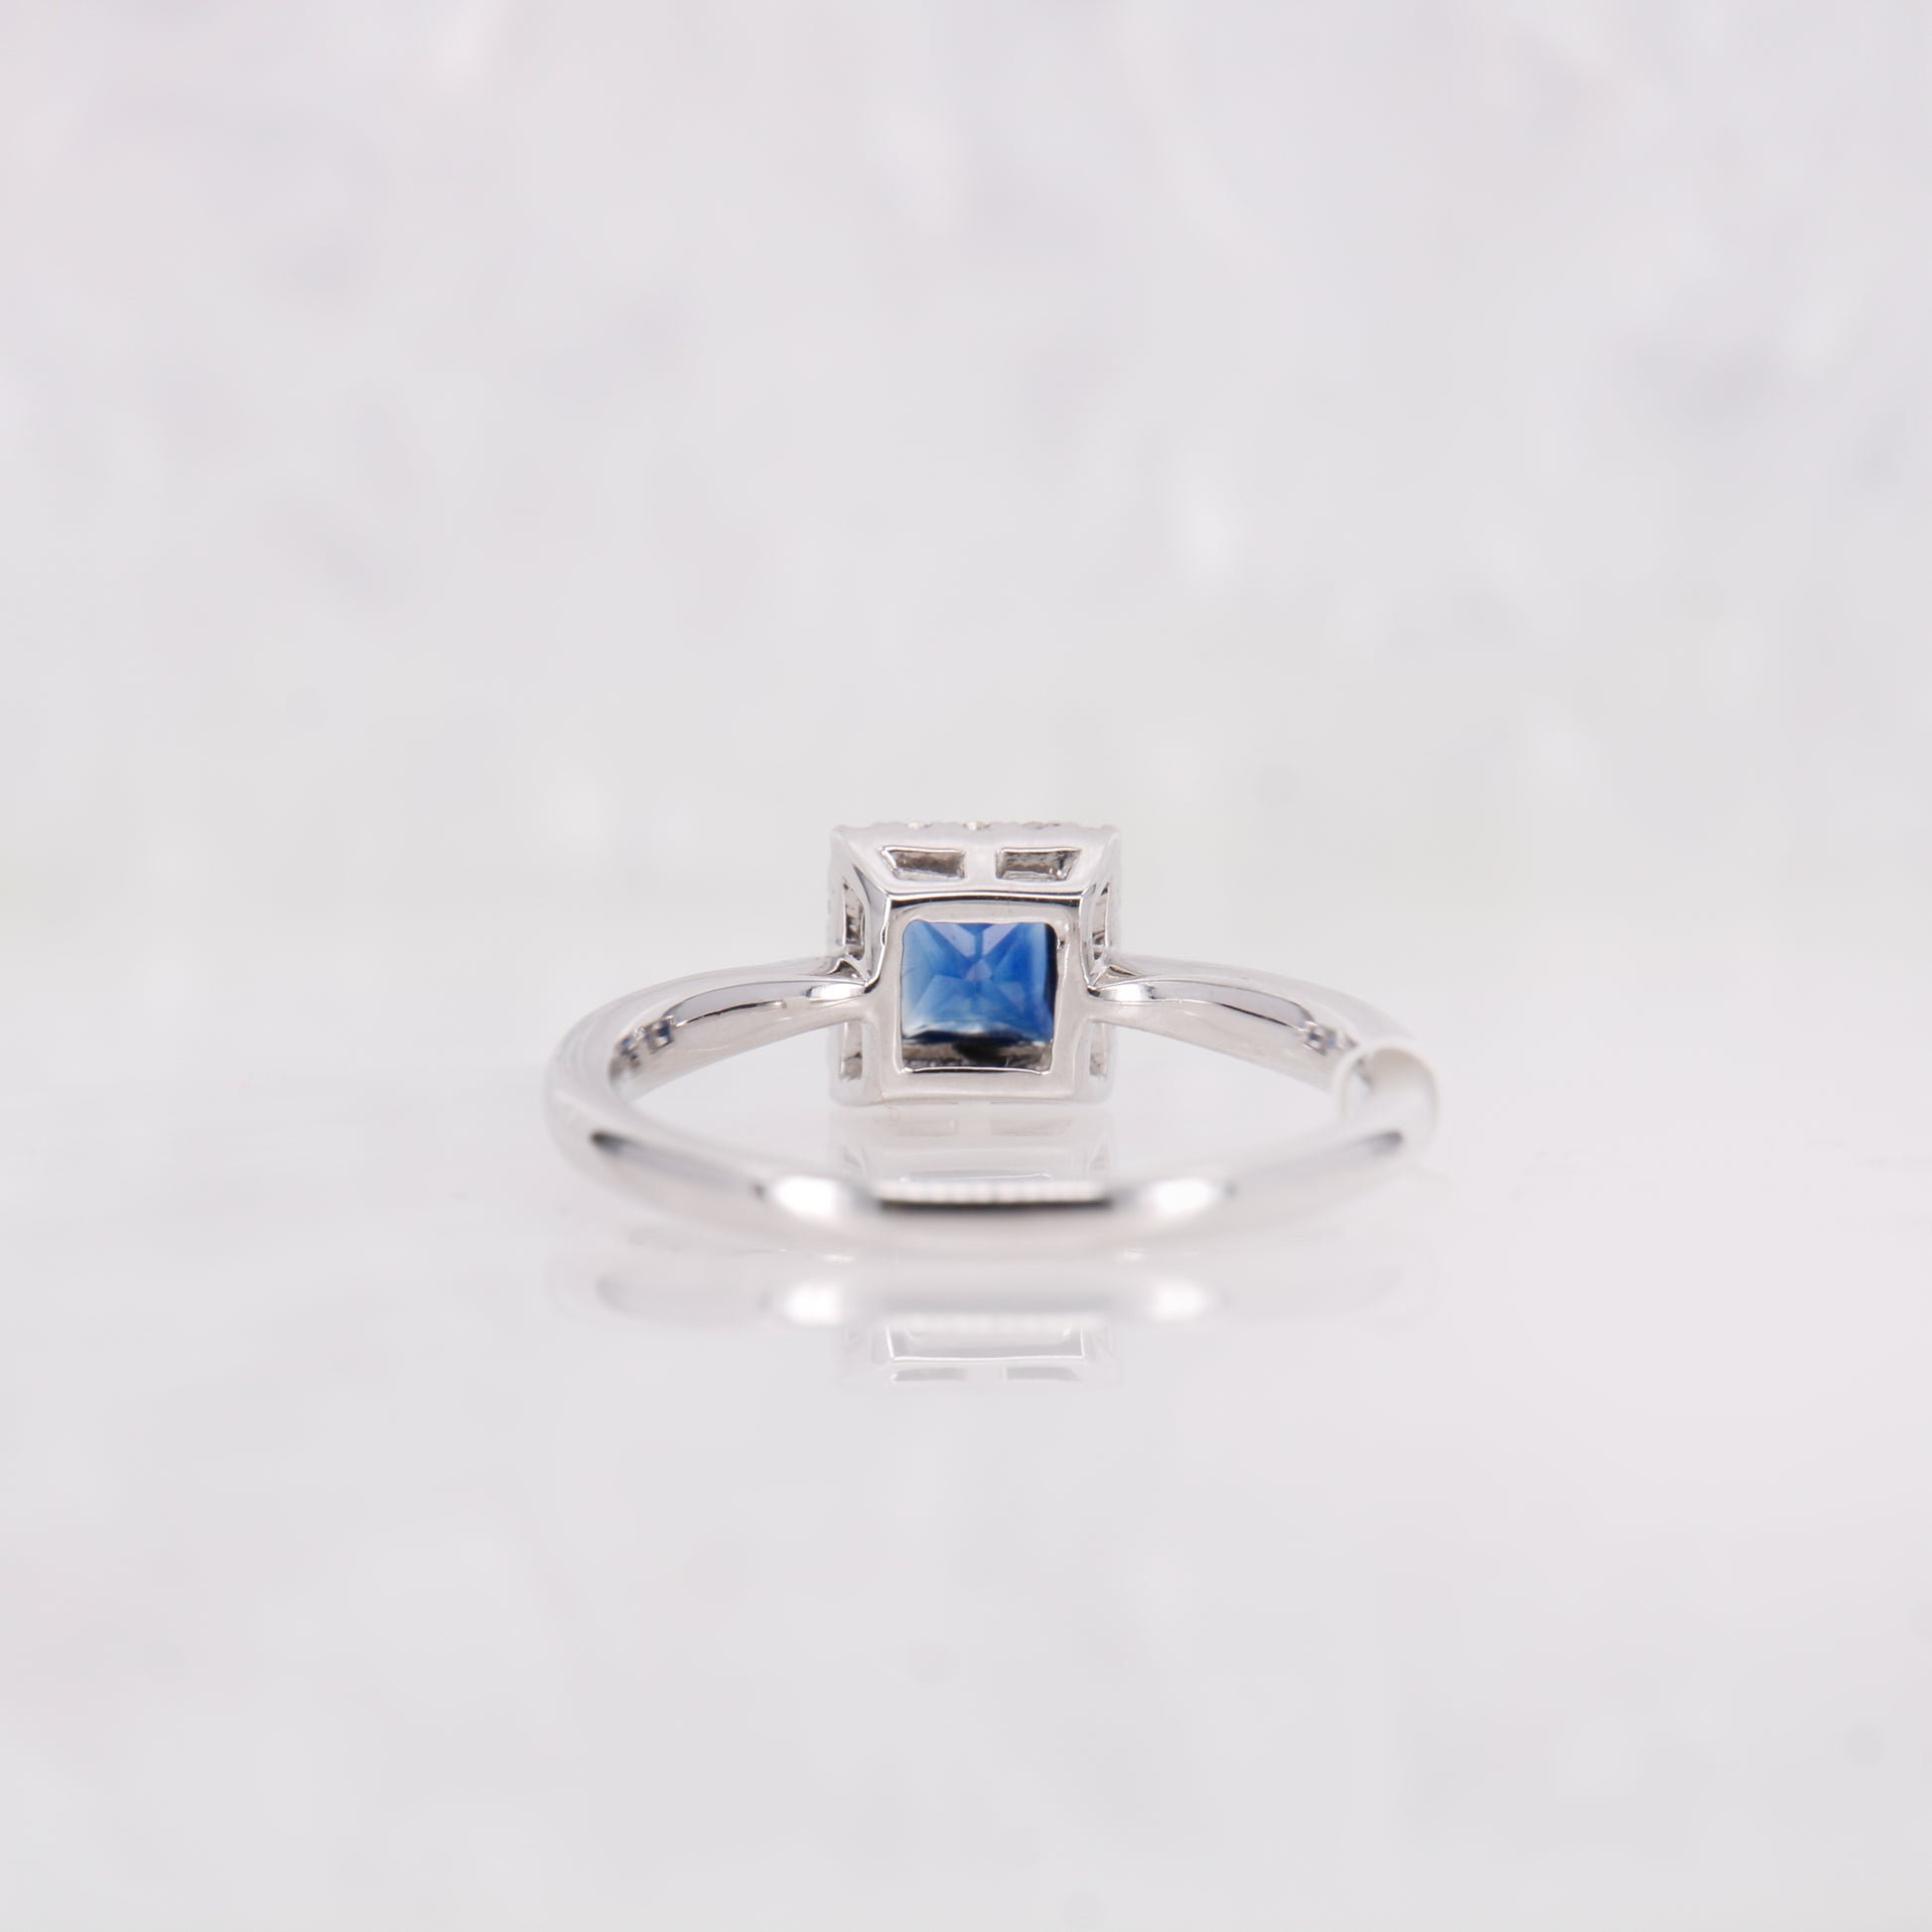 Sapphire and Diamond ring. Featuring a 0.45ct princess cut sapphire surrounded by a sparkling 0.10ct diamond halo.